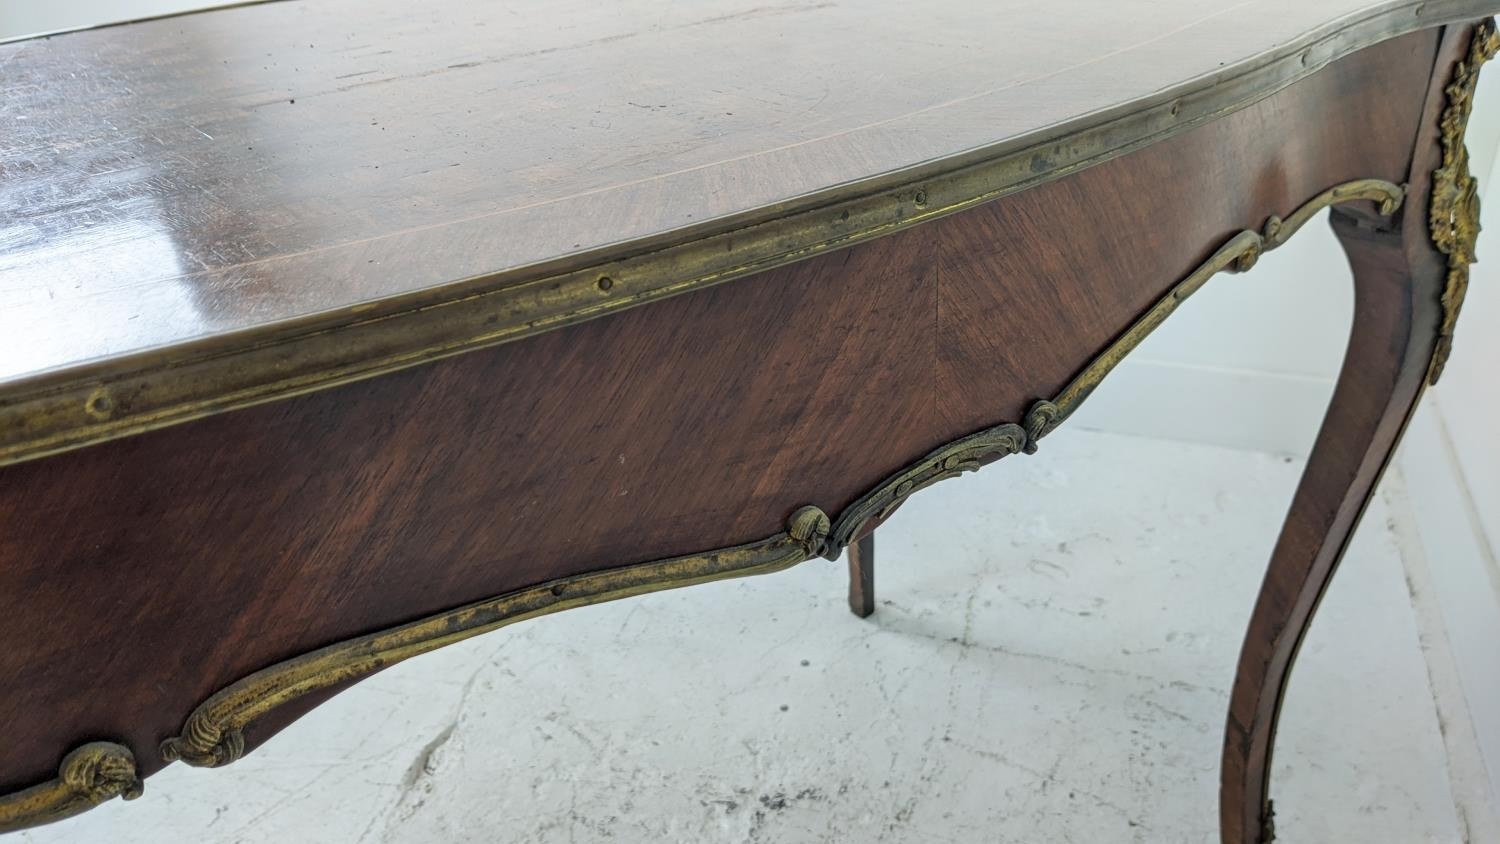 BUREAU PLAT, circa 1880, Louis XV style, French parquetry with ormolu mounts single long drawer - Image 22 of 22